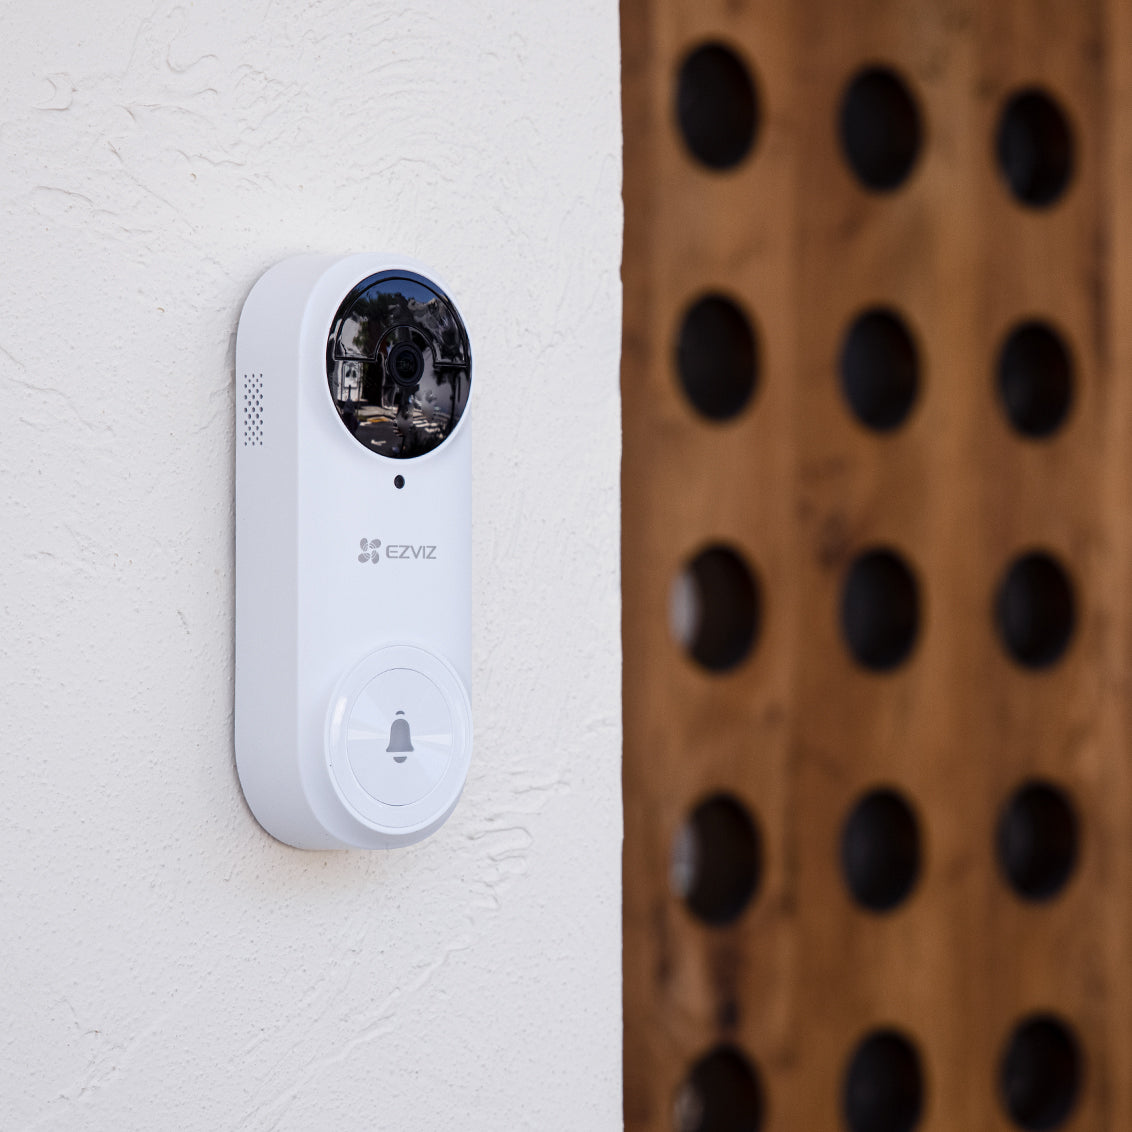 Ezviz camera review: The H8 Pro 3K offers full circle security - Reviewed